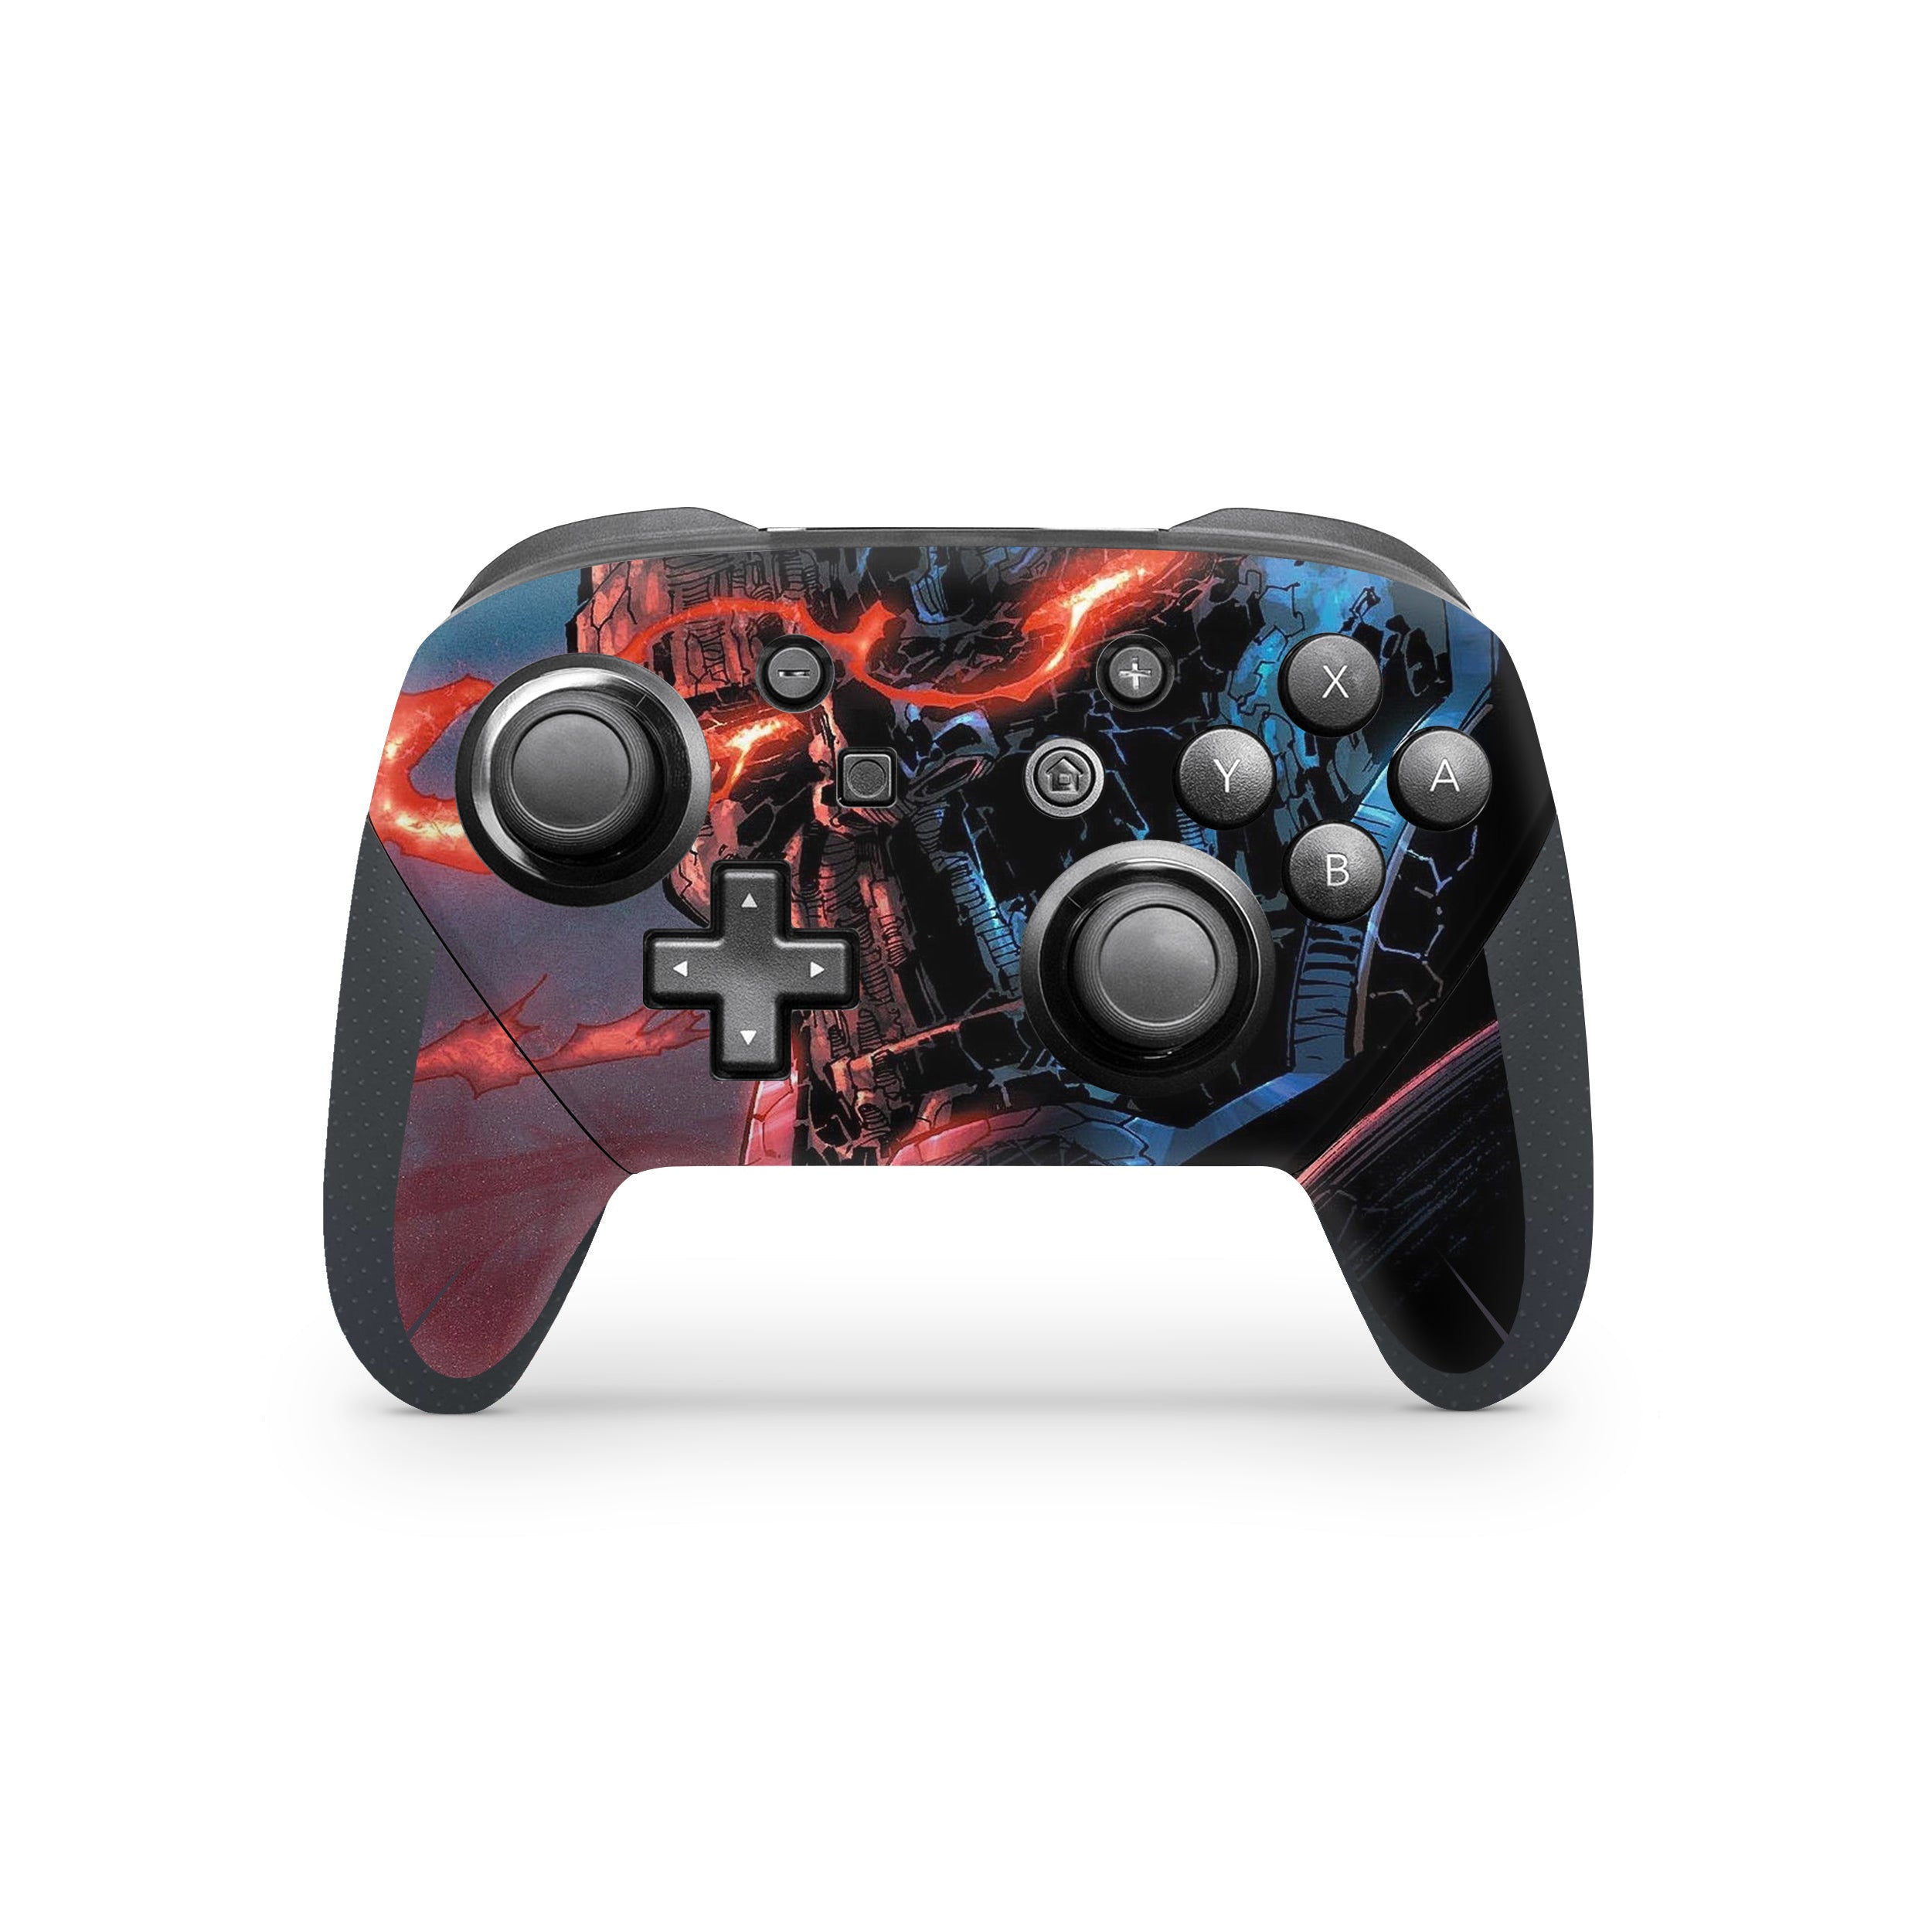 A video game skin featuring a DC Darkseid design for the Switch Pro Controller.